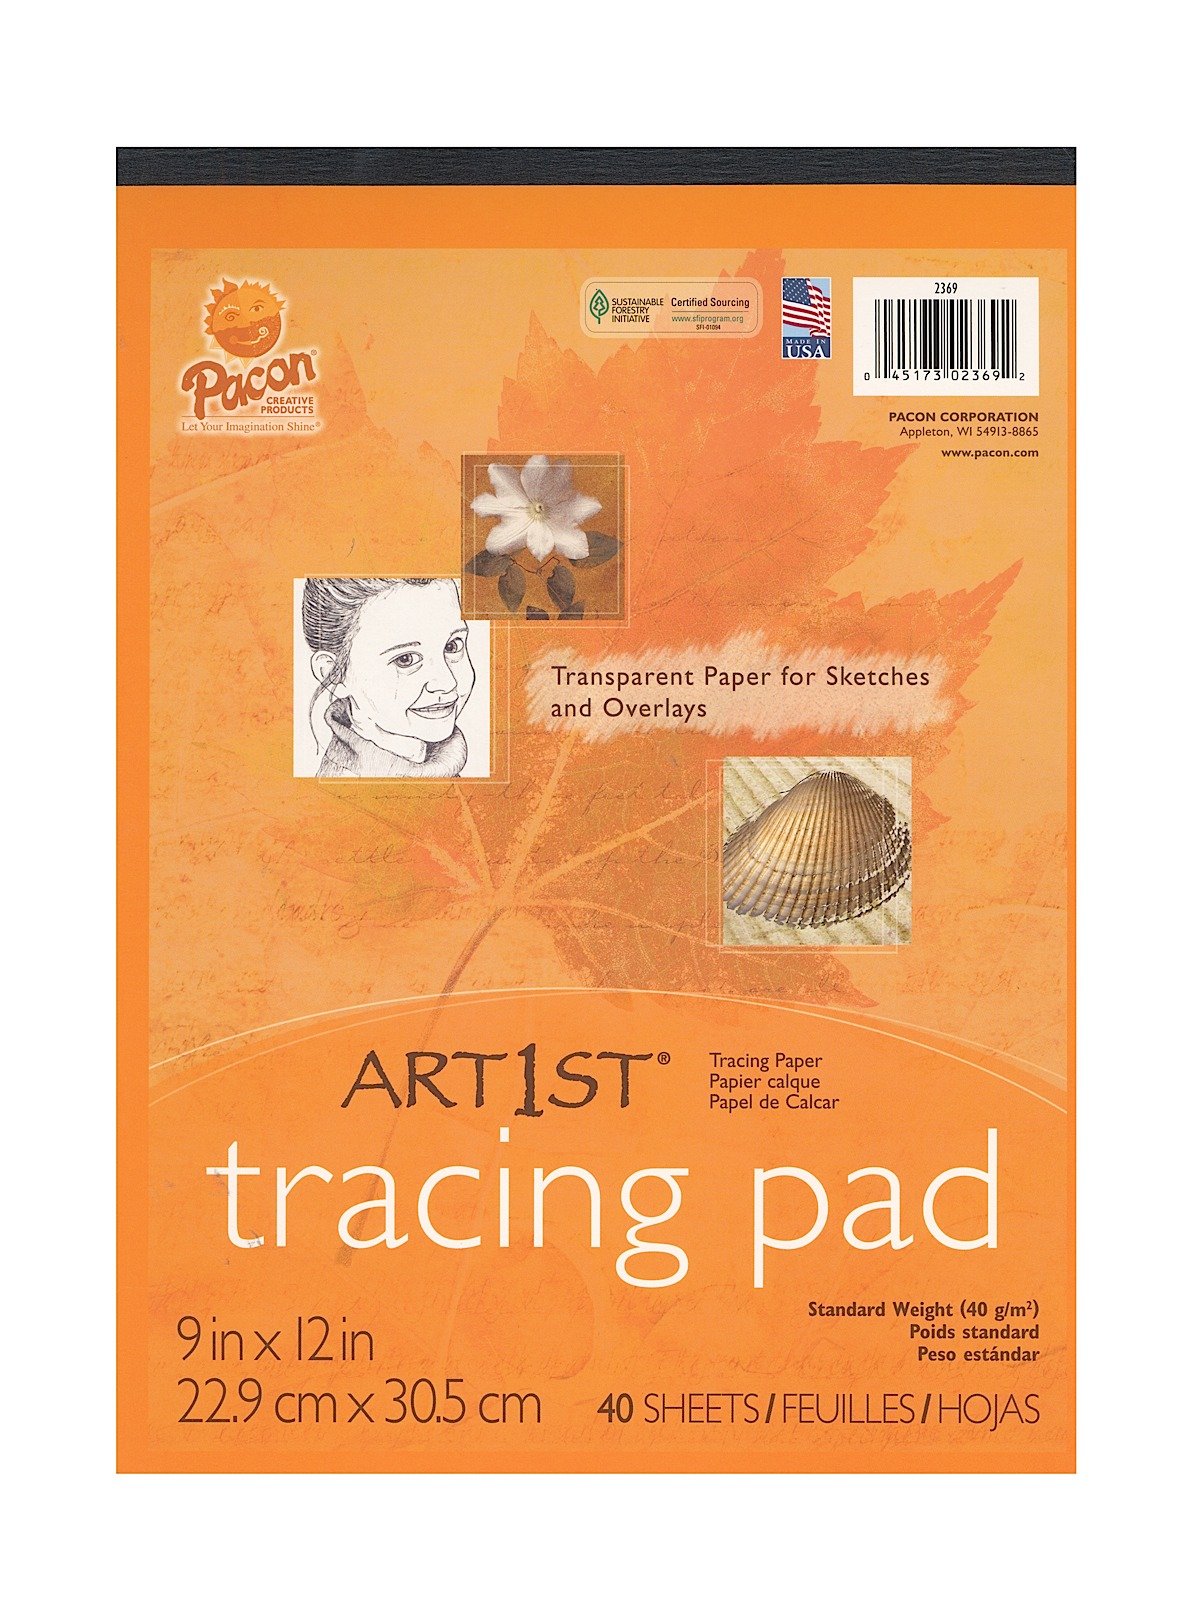 Pacon - Art1st Tracing Paper Pads